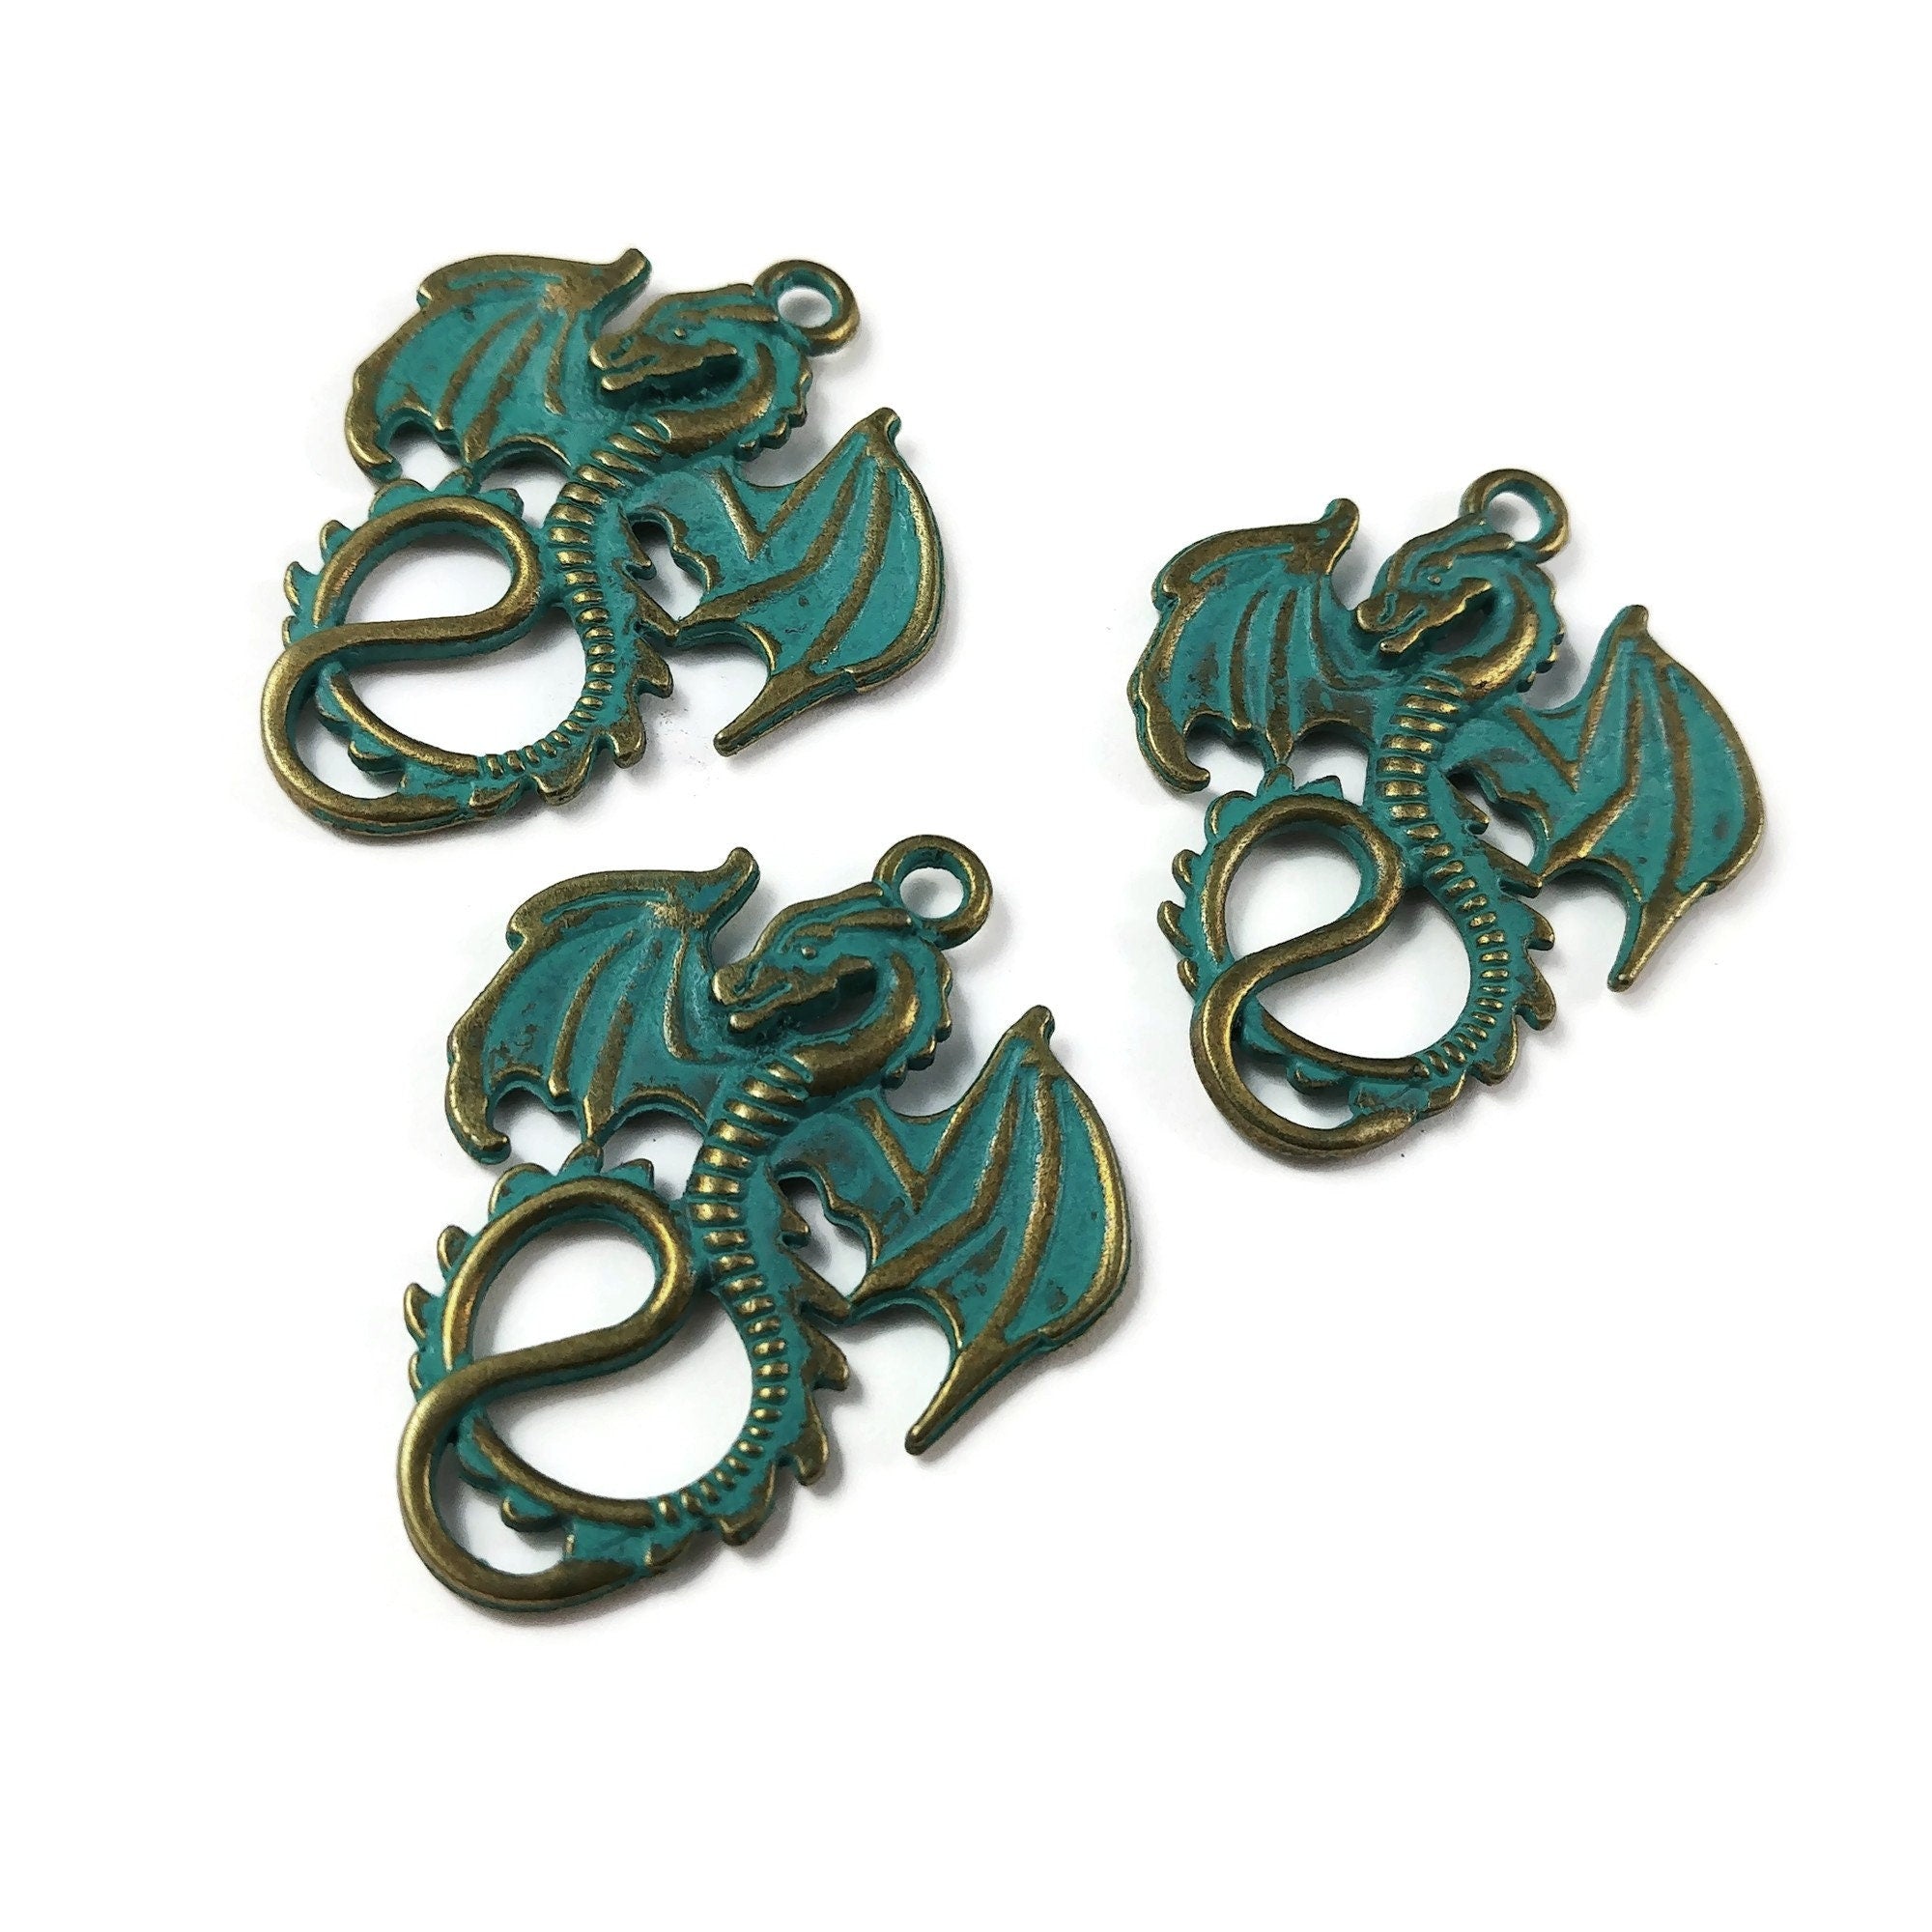 WZNB 5Pcs 43x41mm Dragon Charms for Jewelry Making Alloy Chameleon Pendant  Diy Earring Necklace Handmade Accessories Supplies - AliExpress